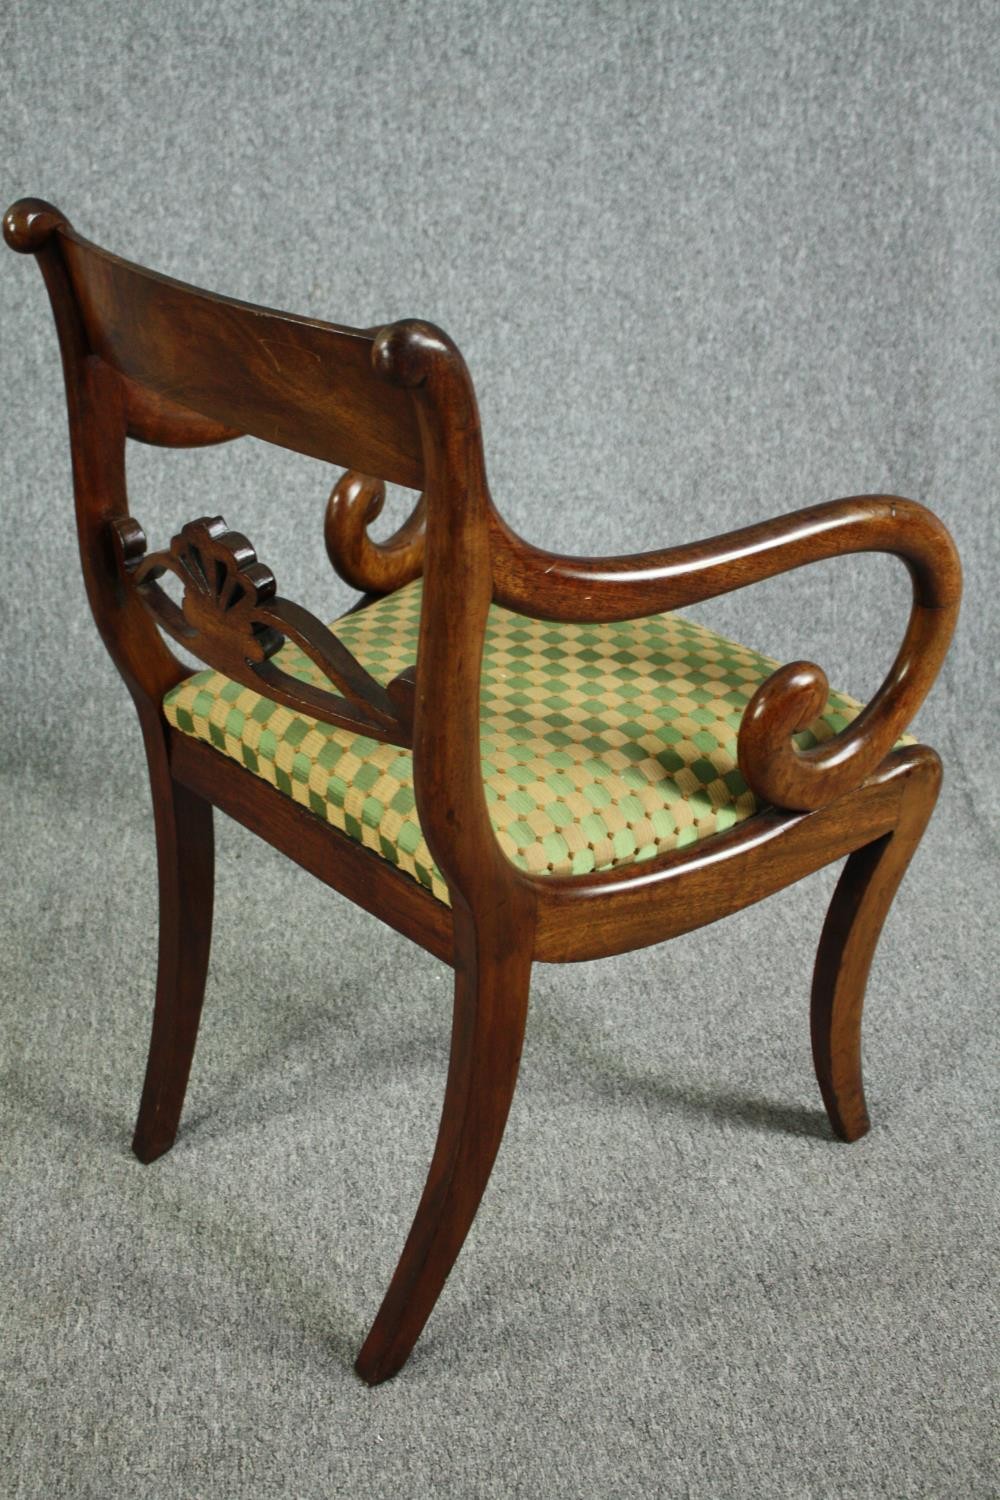 A Regency mahogany armchair along with a 19th century footstool covered in the same material. - Image 4 of 6